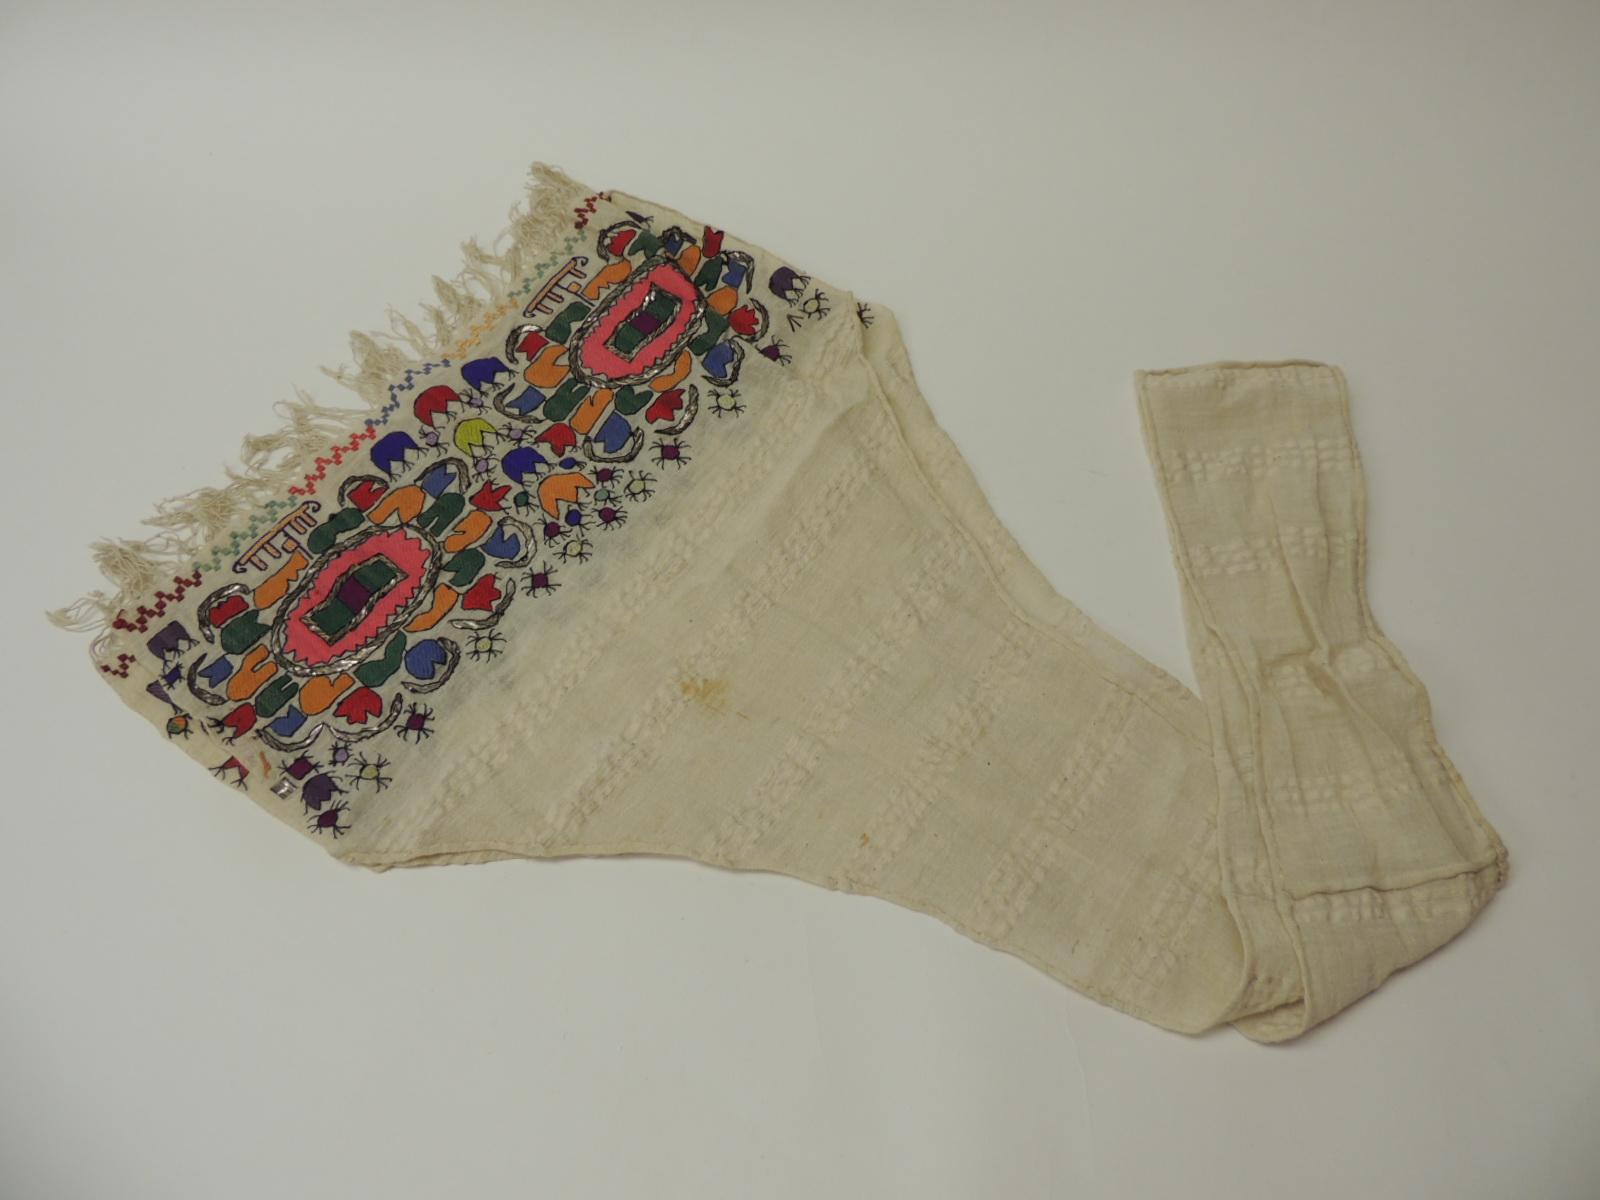 Suzani Turkish Linen Scarf with Heavy Embroidery in Silk and Metallic Floss Threads